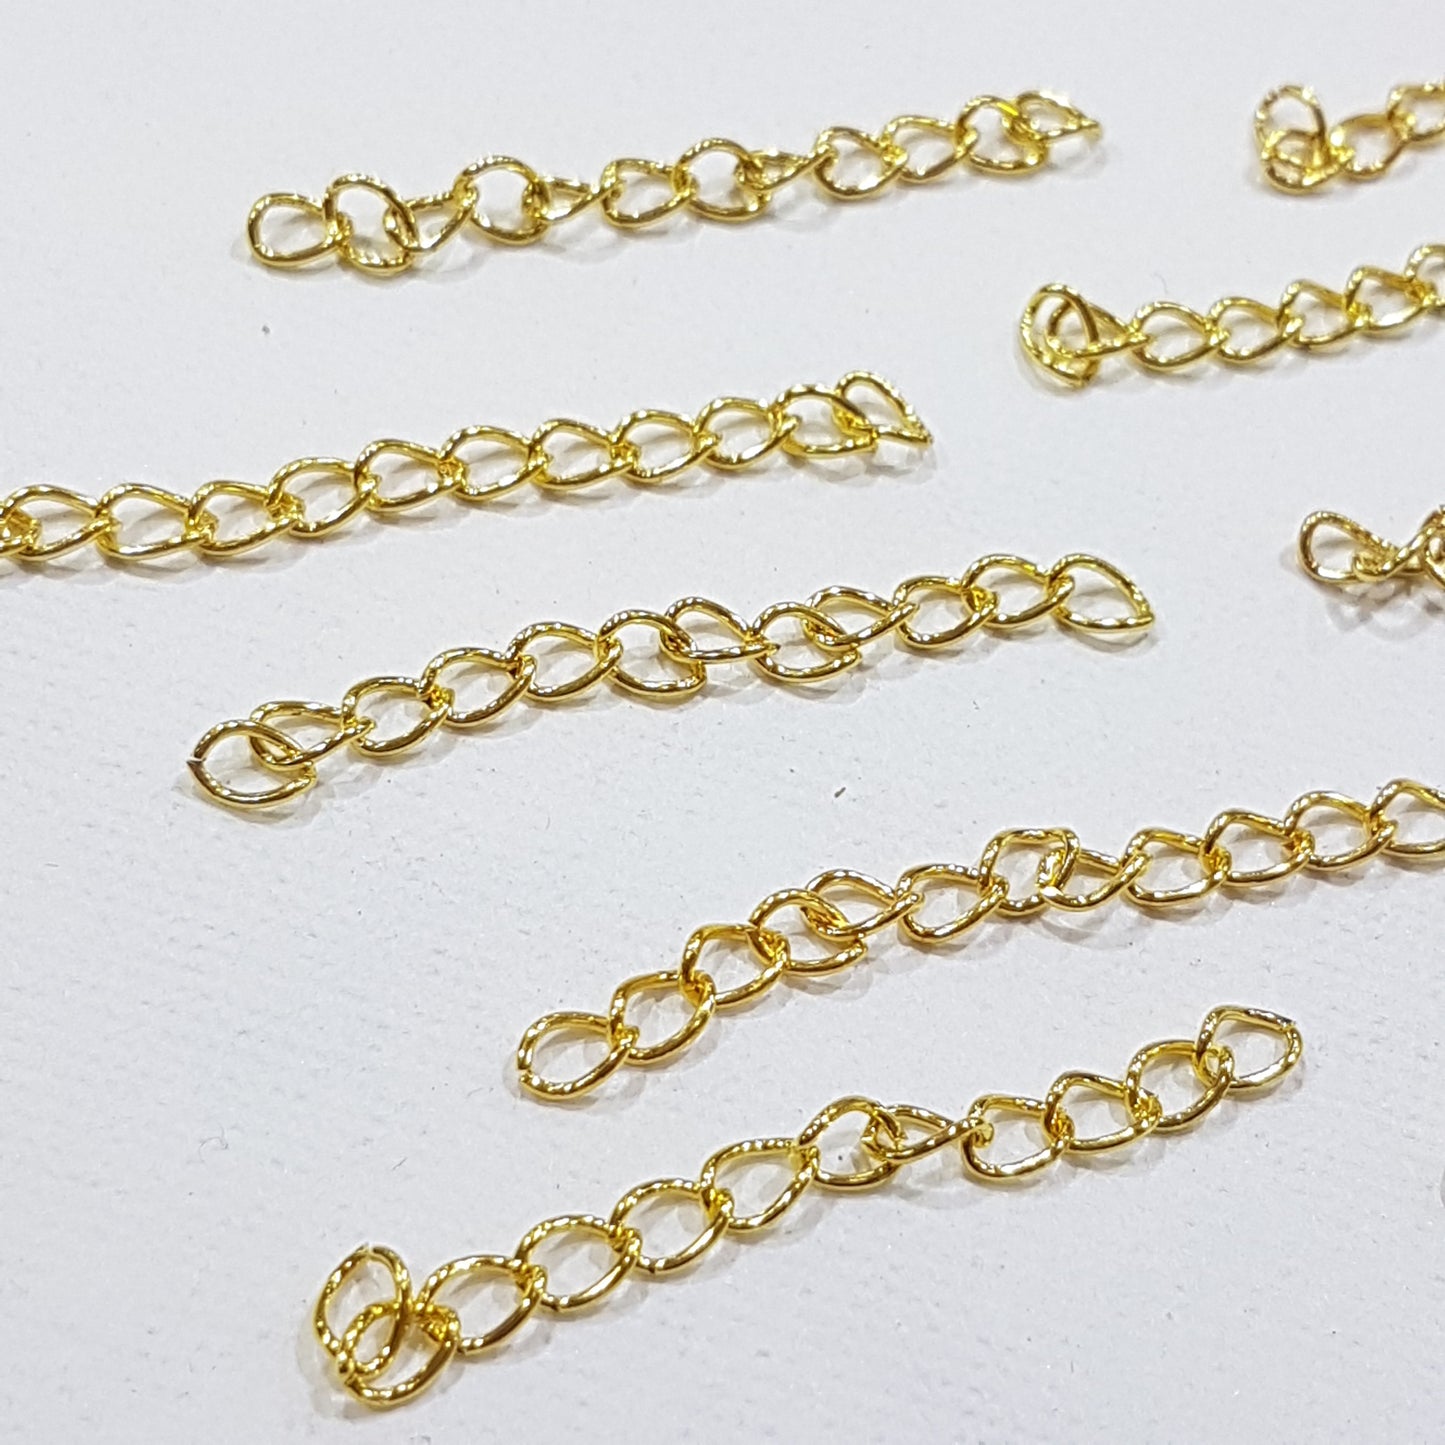 10pc Gold Extension Chain